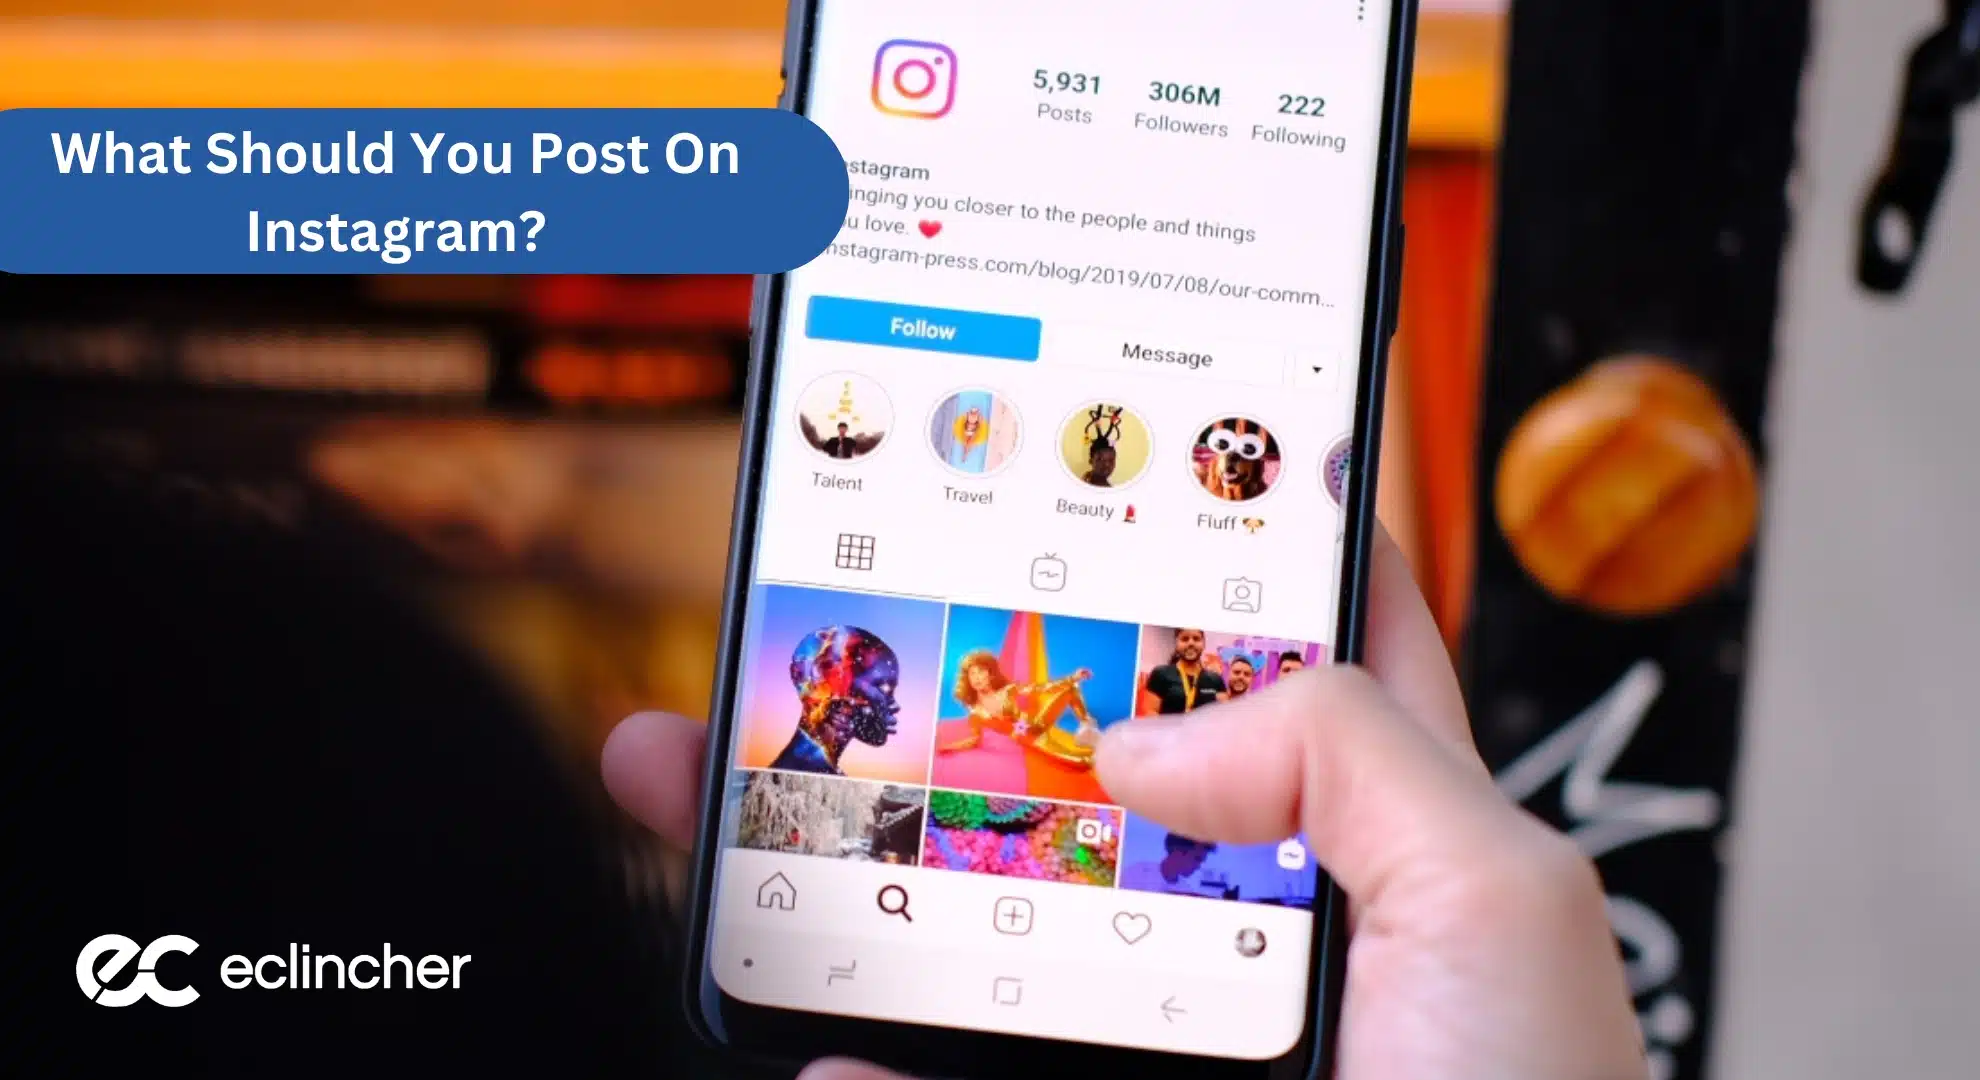 What Should You Post On Instagram